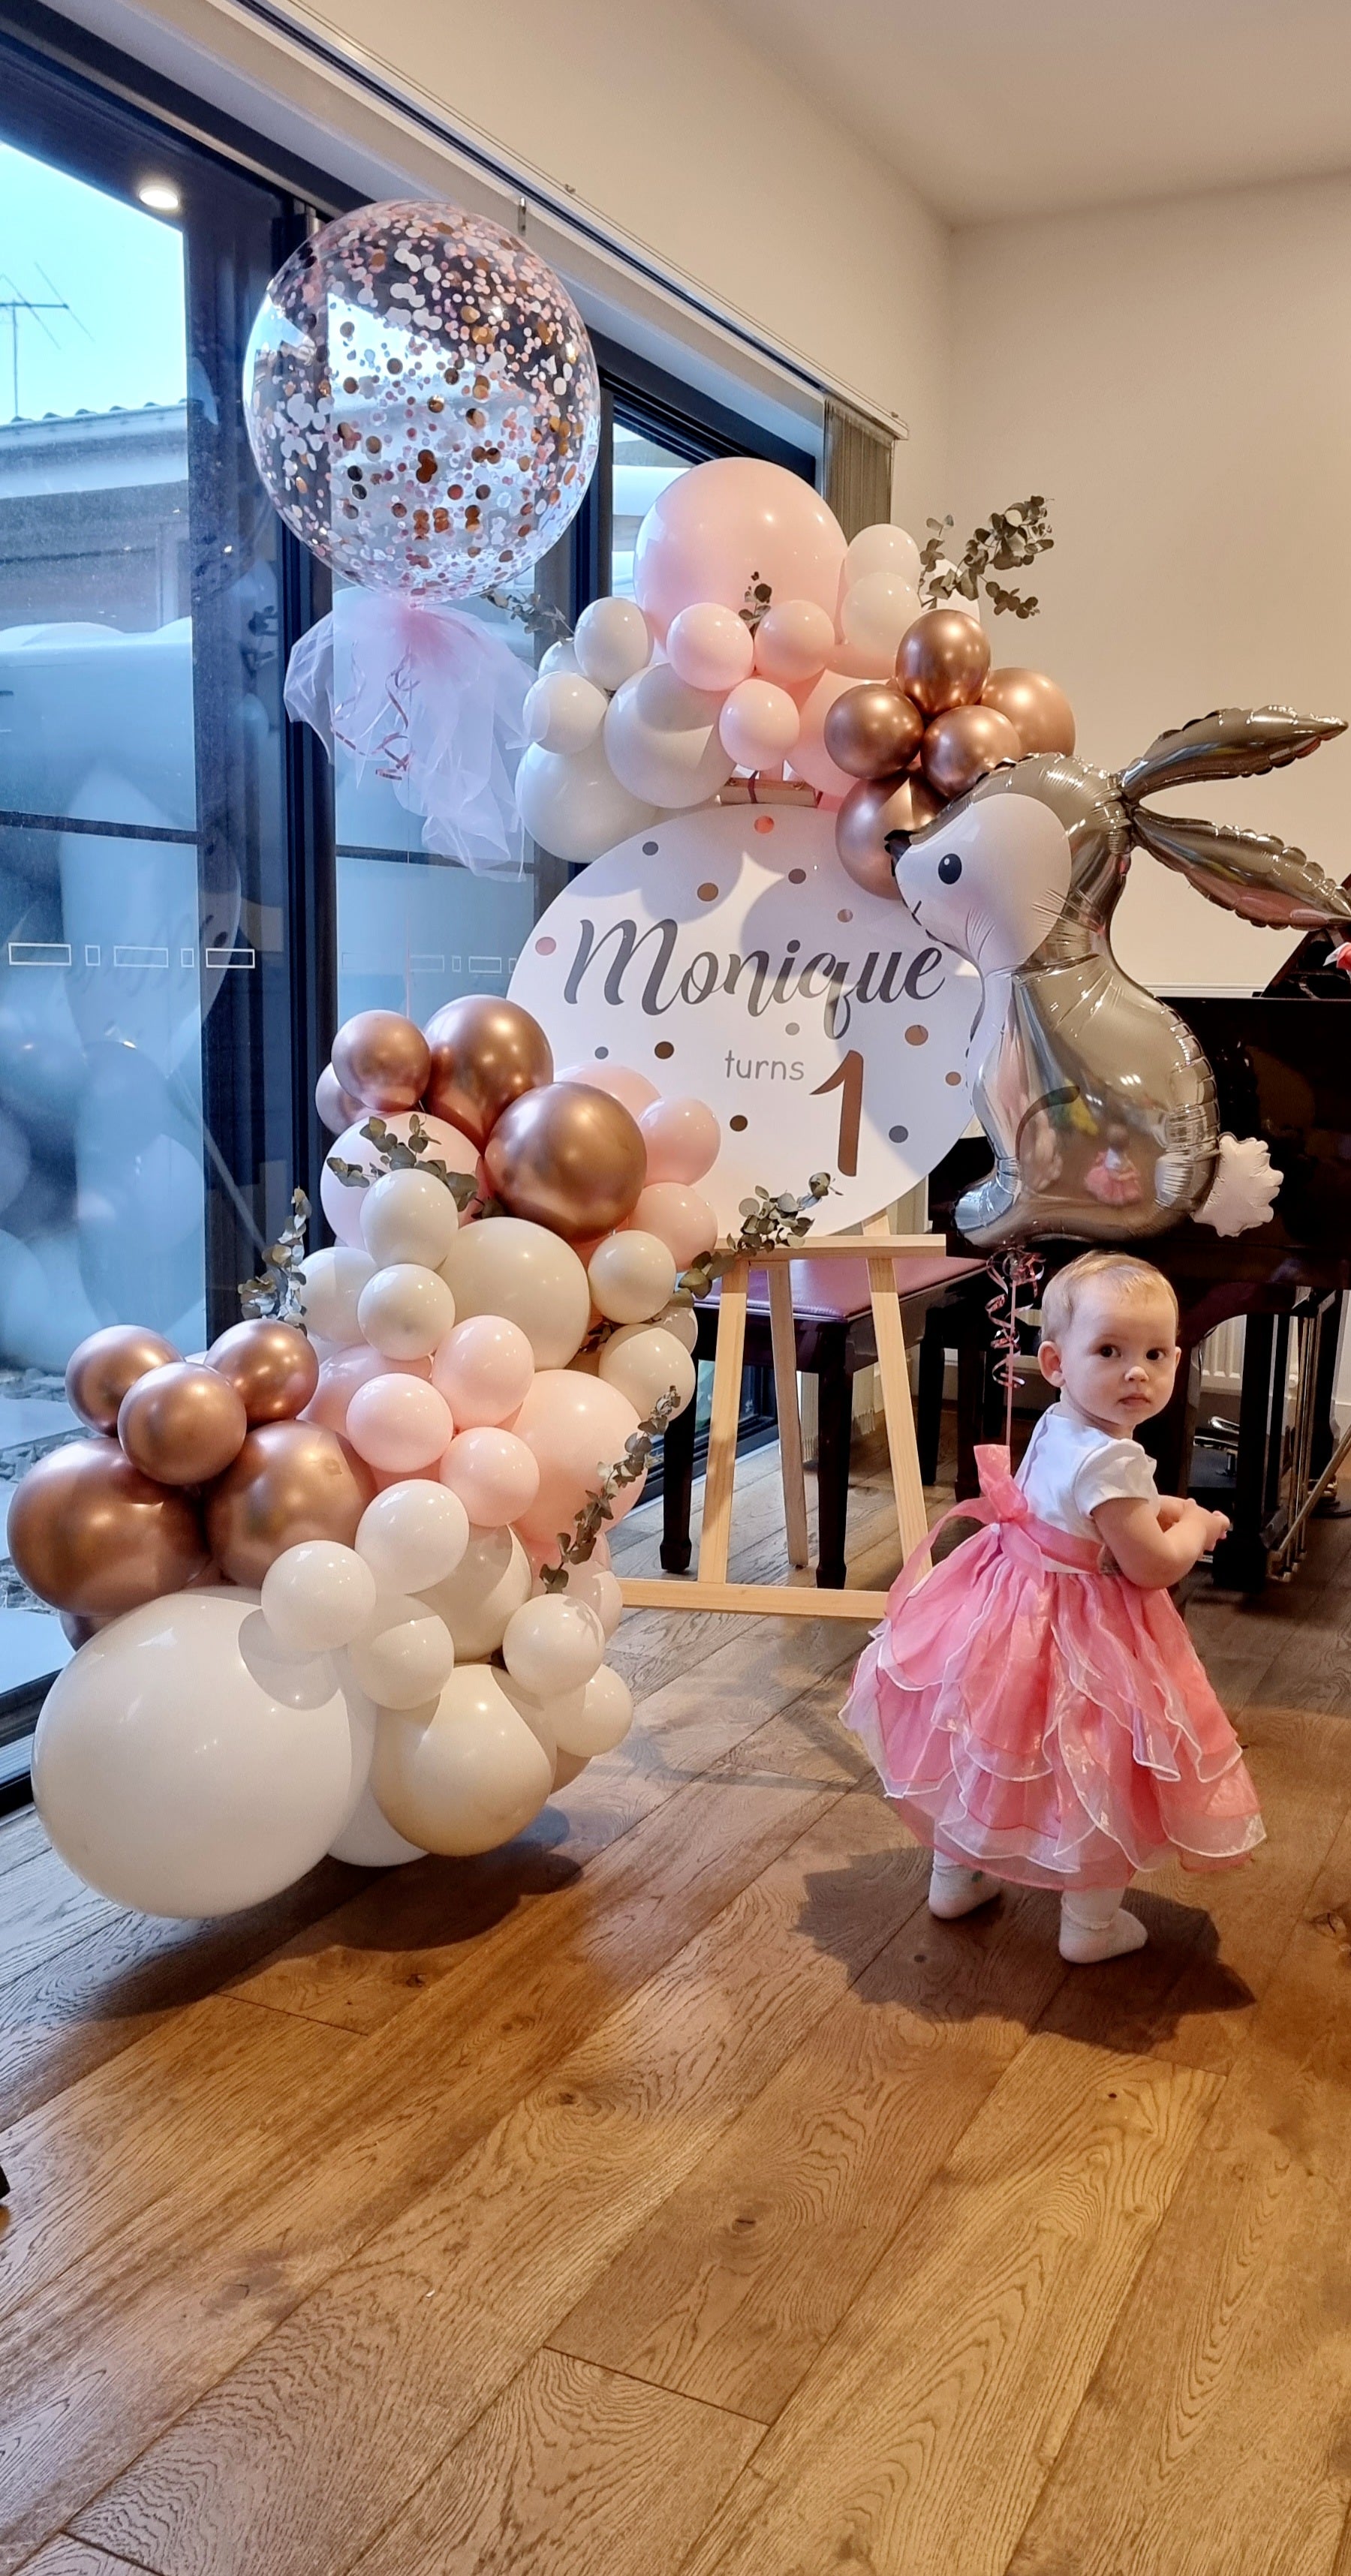 Balloon Easel Display Melbourne Monique Turns 1 Pink White Gold Bunny